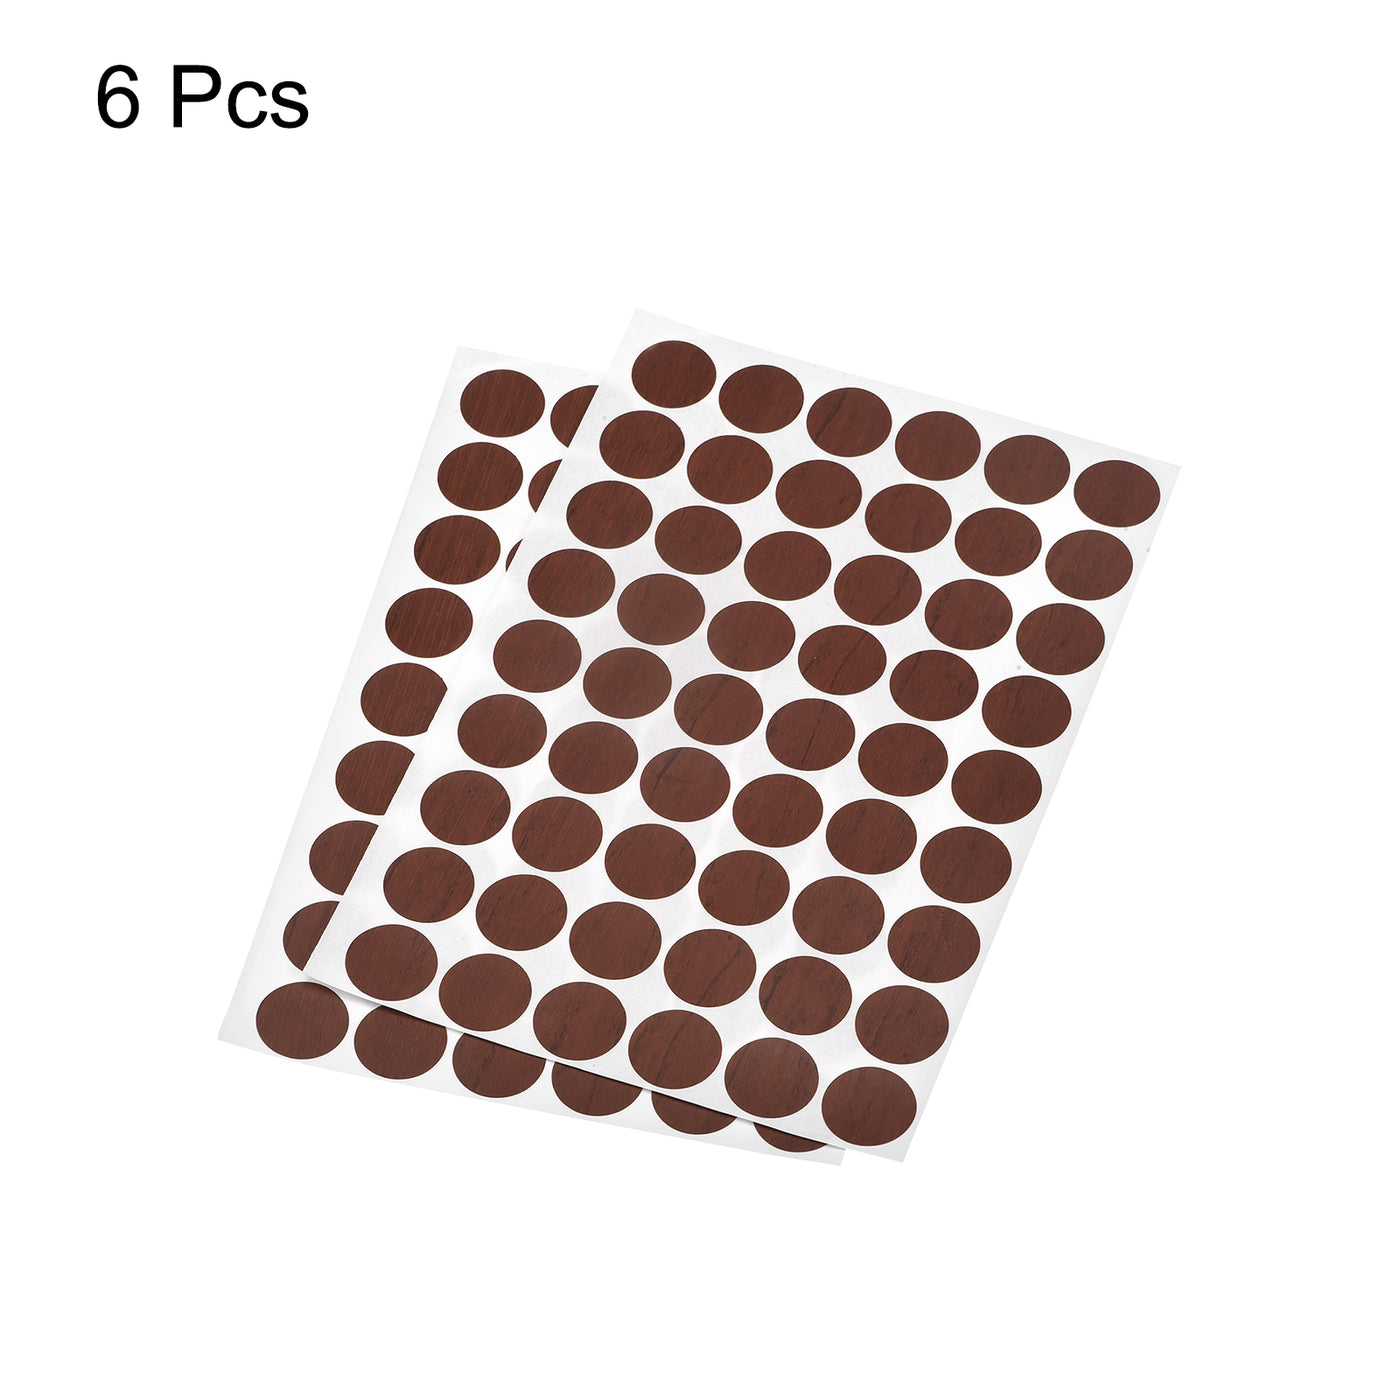 uxcell Uxcell Screw Hole Cover Stickers, 21mm Dia PVC Self Adhesive Covers Caps for Wood Furniture Cabinet Shelf Wardrobe, Red Walnut 6 Sheet/324pcs